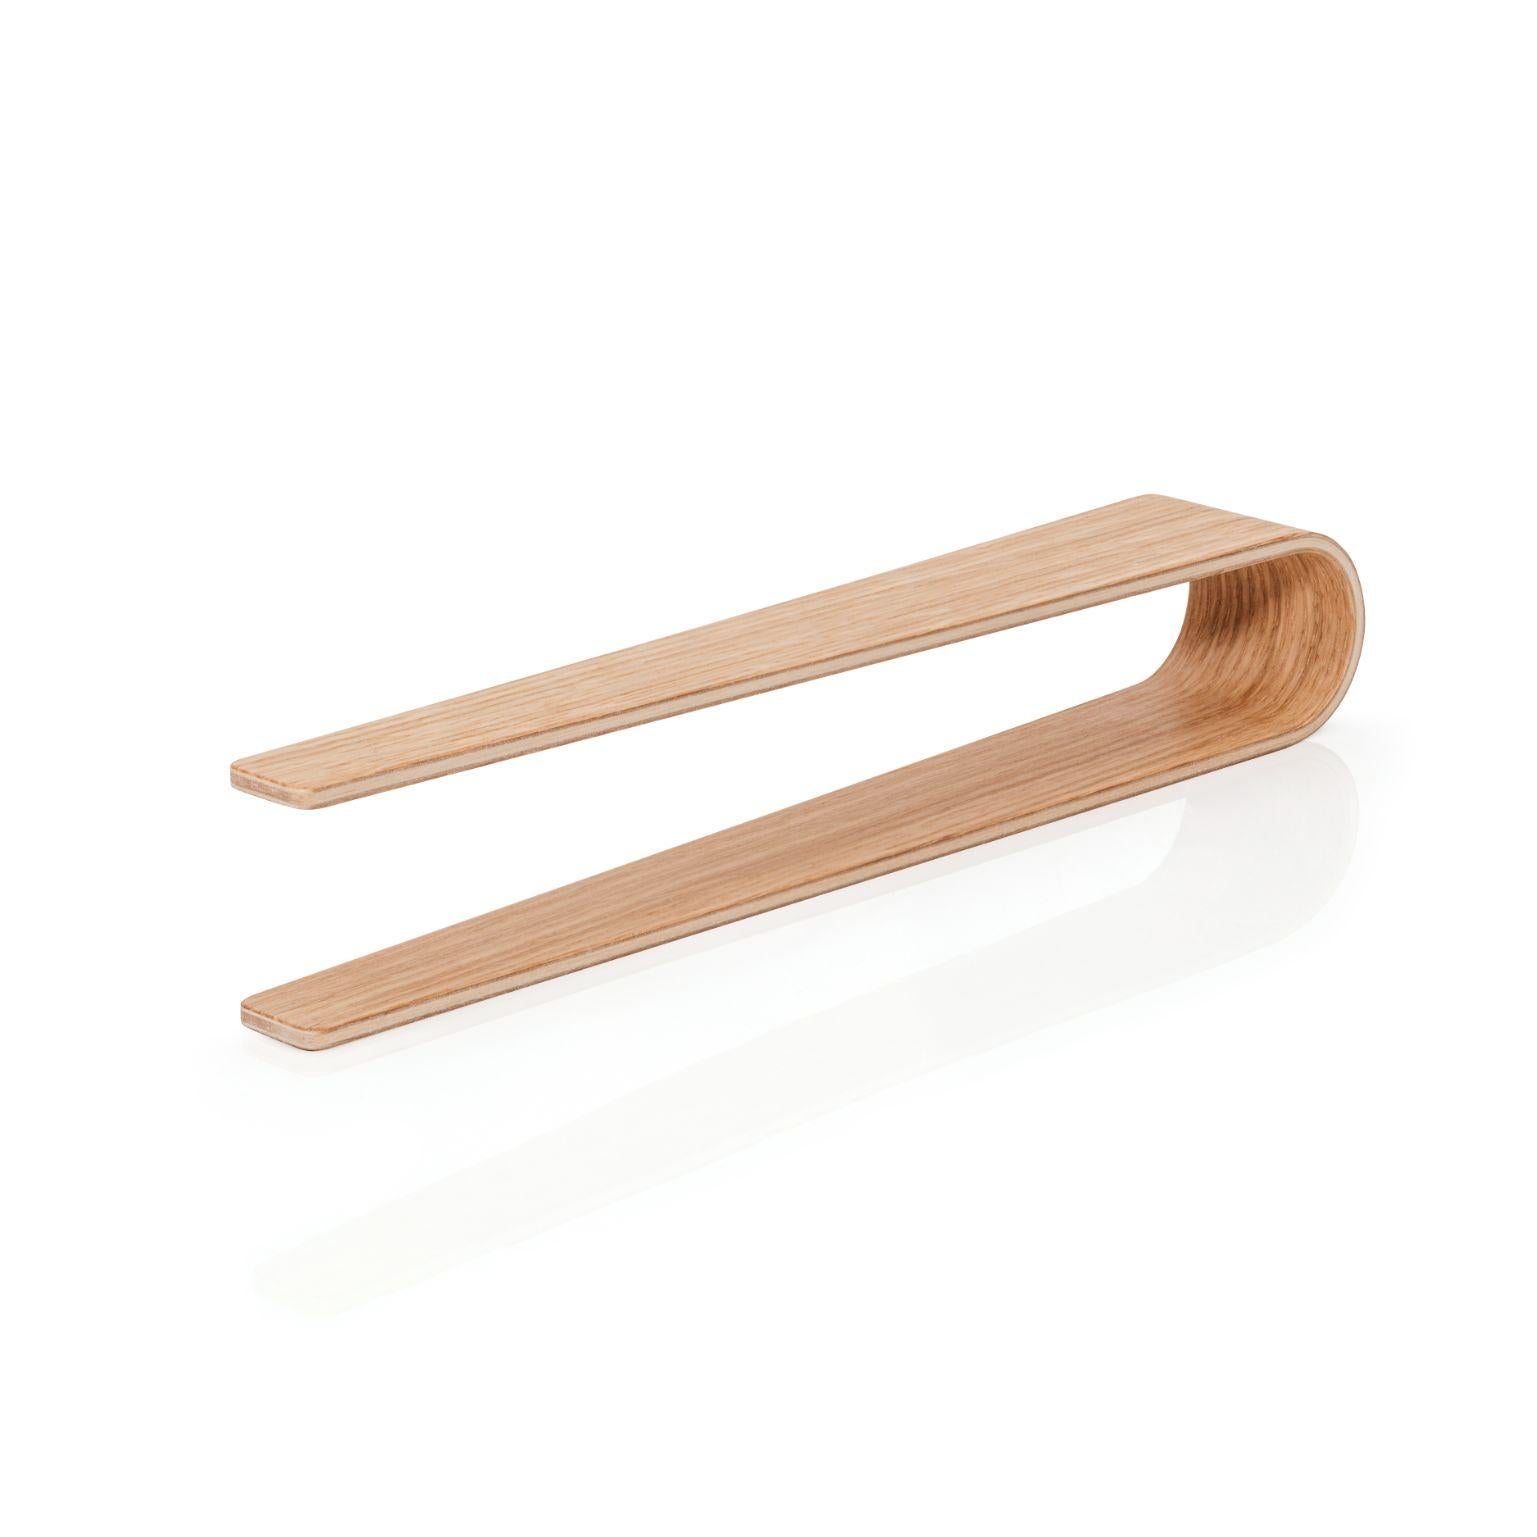 Oak Nokka tongs by Antrei Hartikainen
Materials: Walnut, maple, natural oil wax
Dimensions: W 24,5 D 4/2 H 6 cm

Also available in a variety of woods

Nokka tongs are suitable for serving a range of light foods including appetizers, salads, quiches,